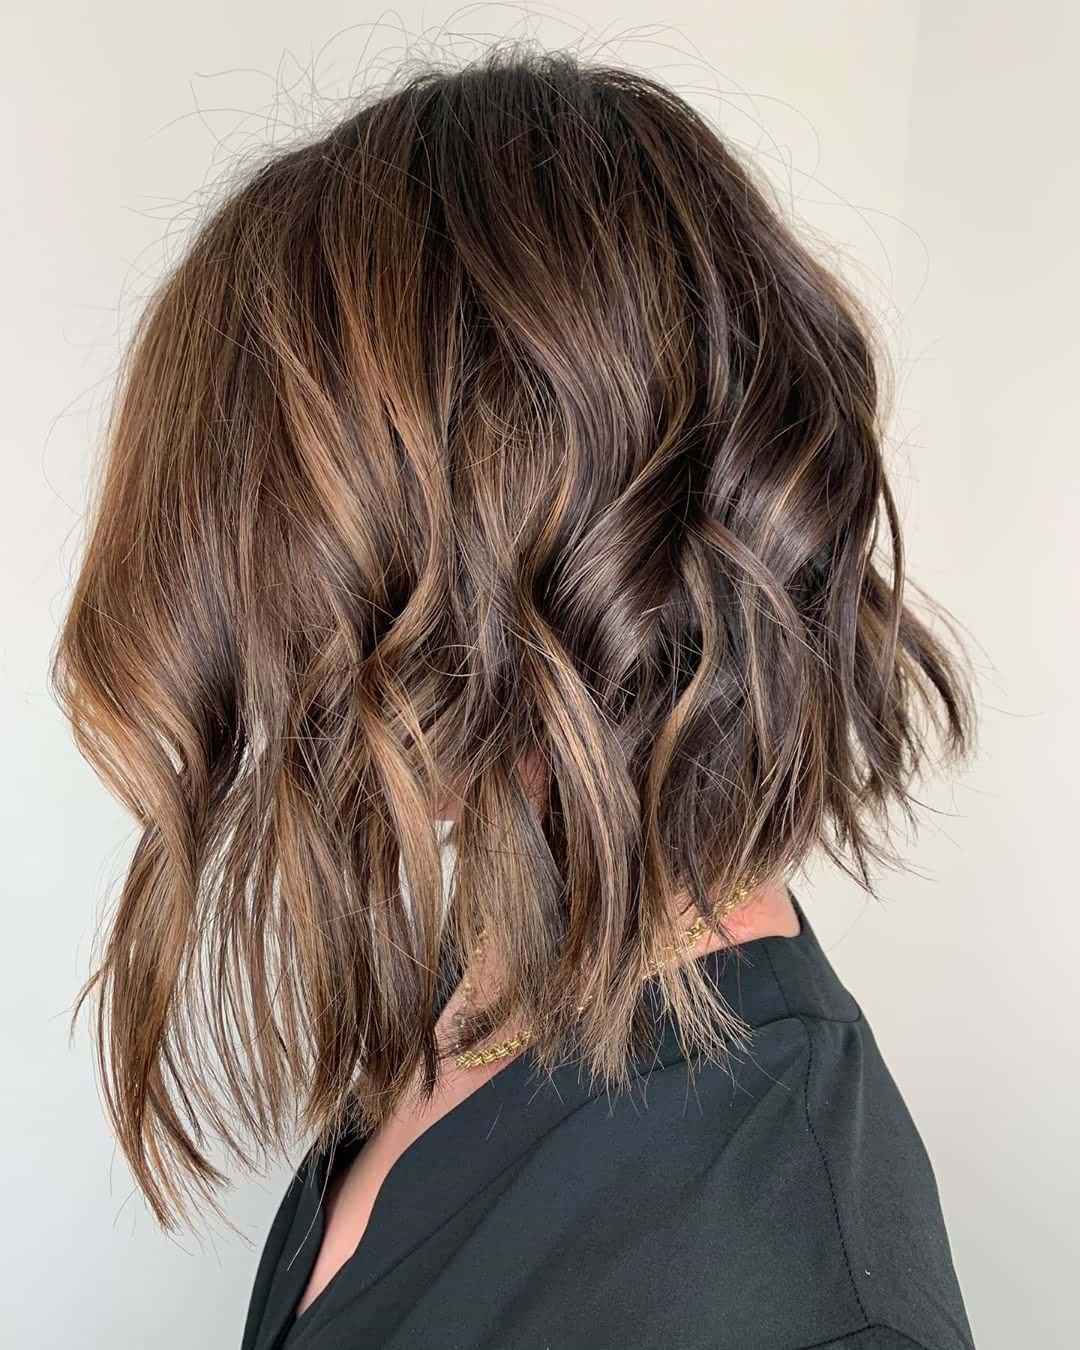 Long layered hair front - nfcbezy